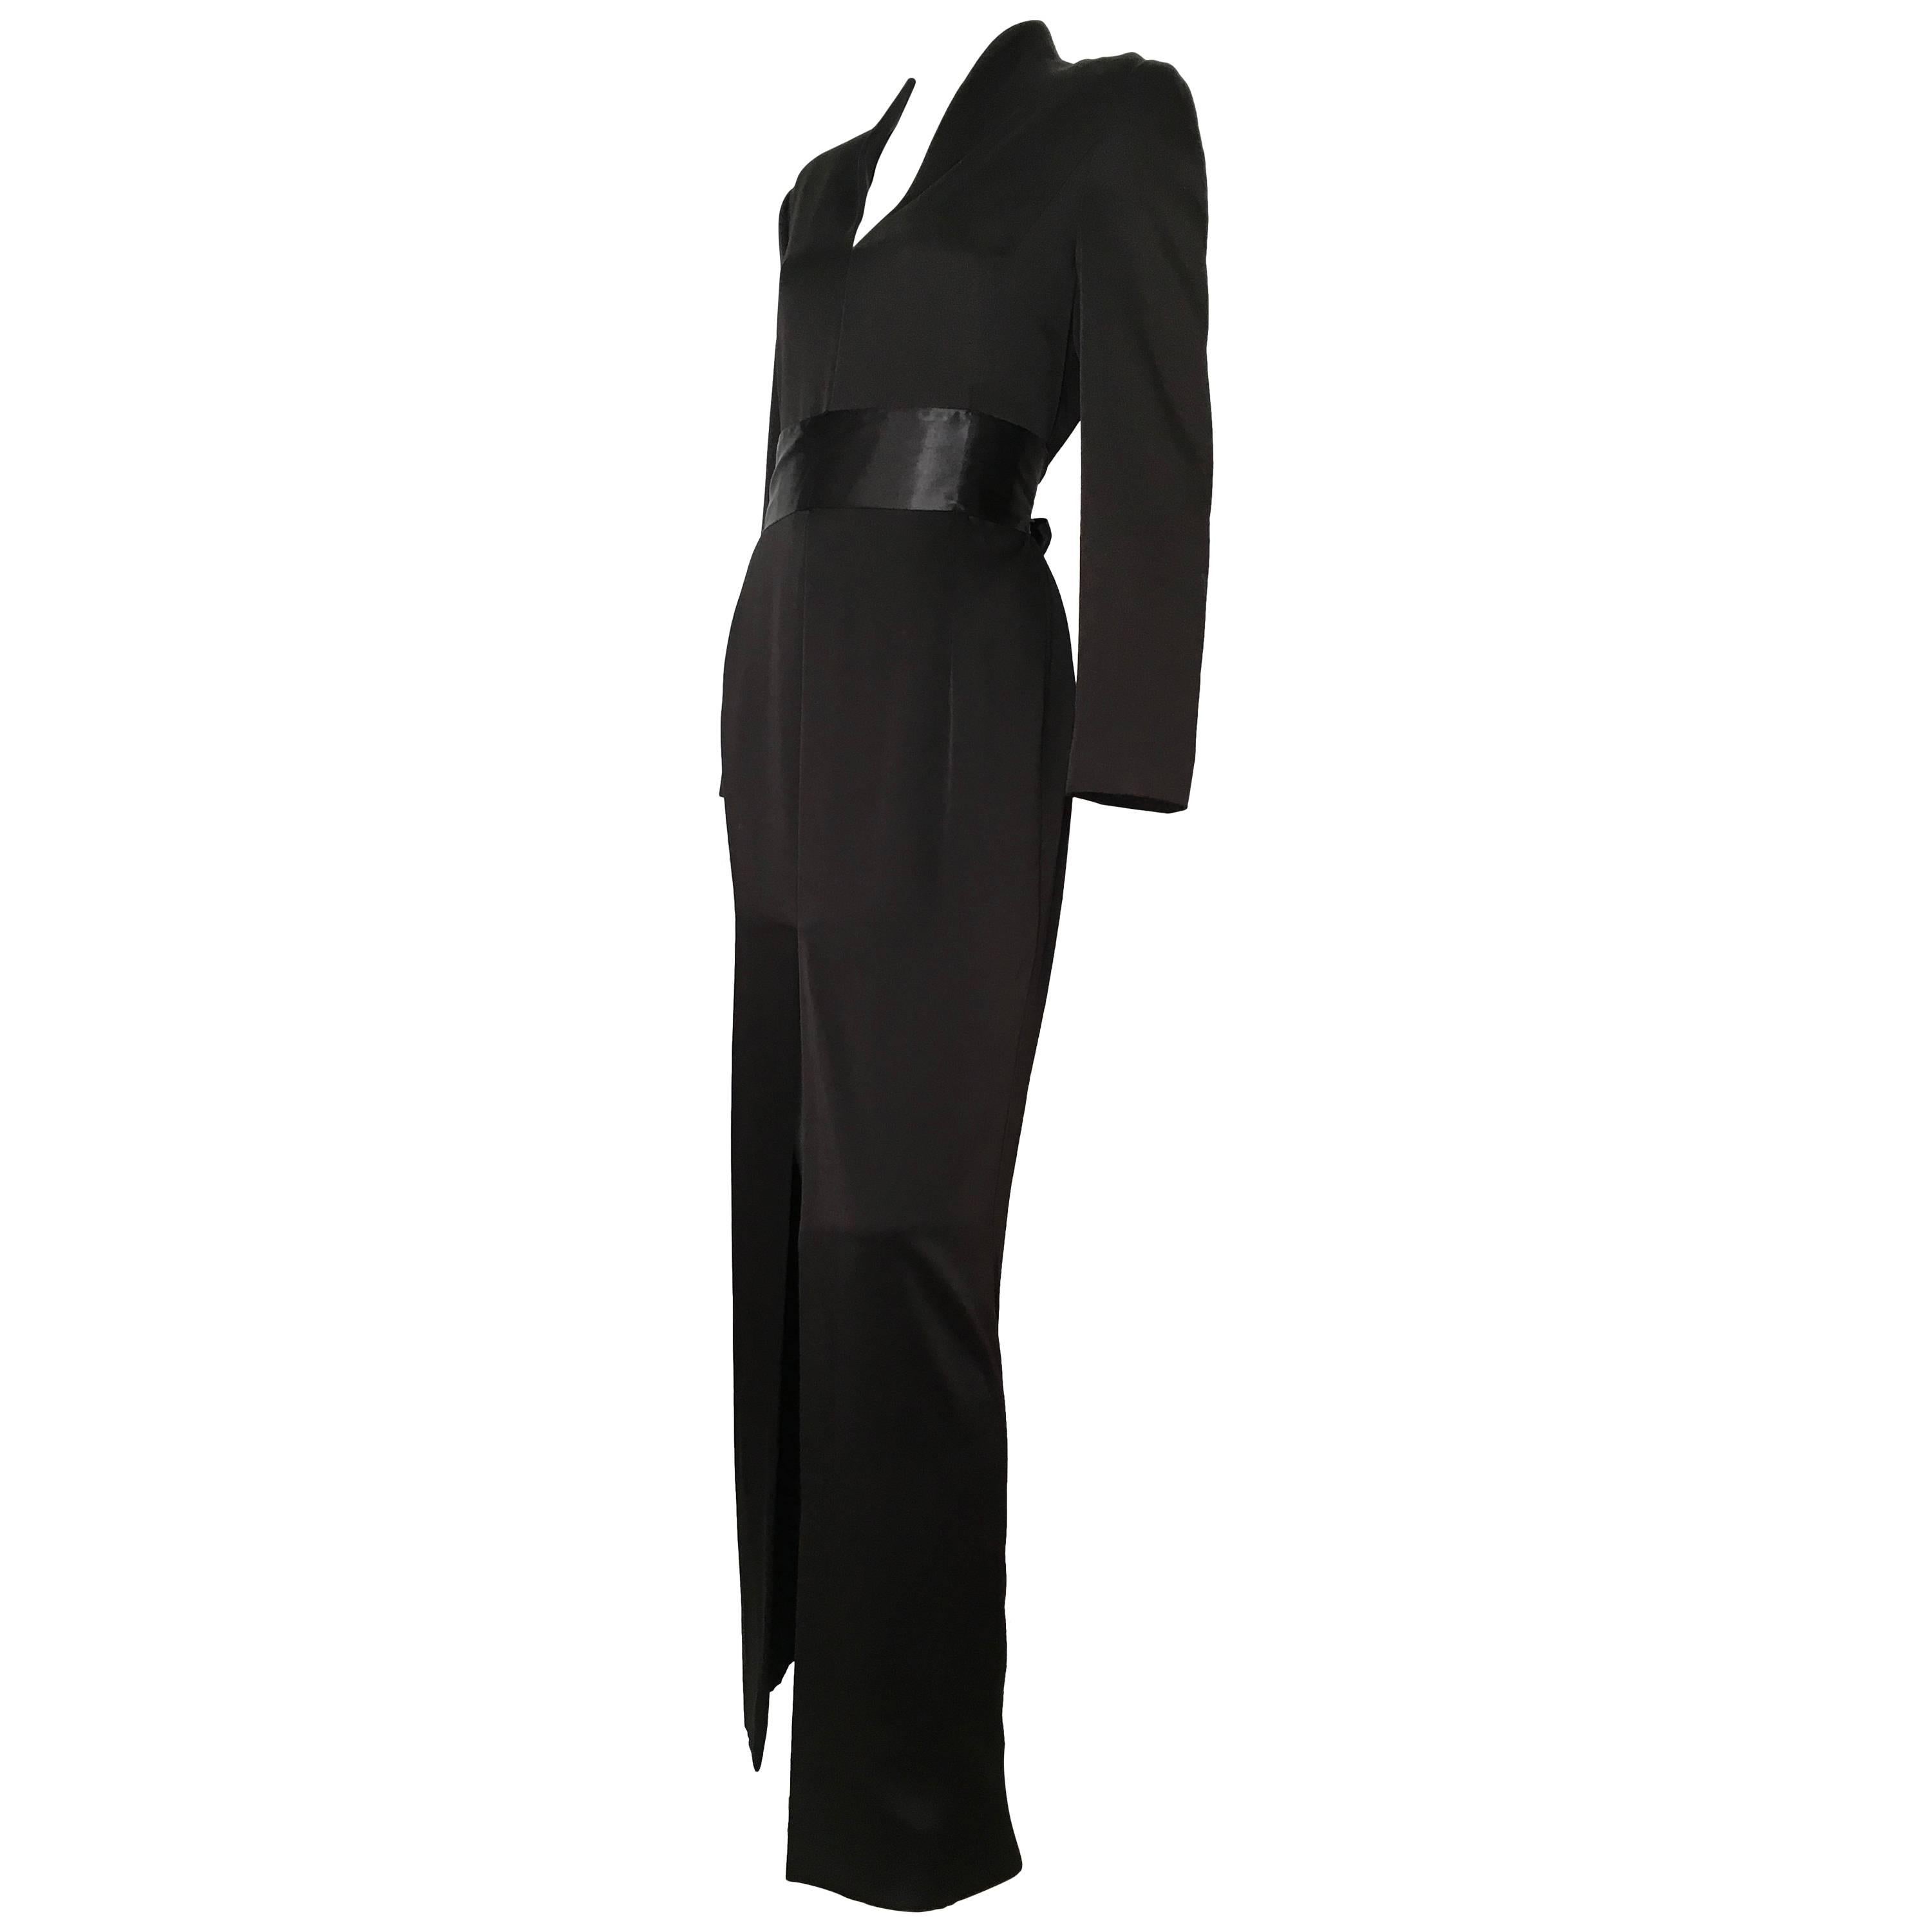 Genny Black Kimono Style Silk Long Gown Size 10 / 12. Never Worn. For Sale